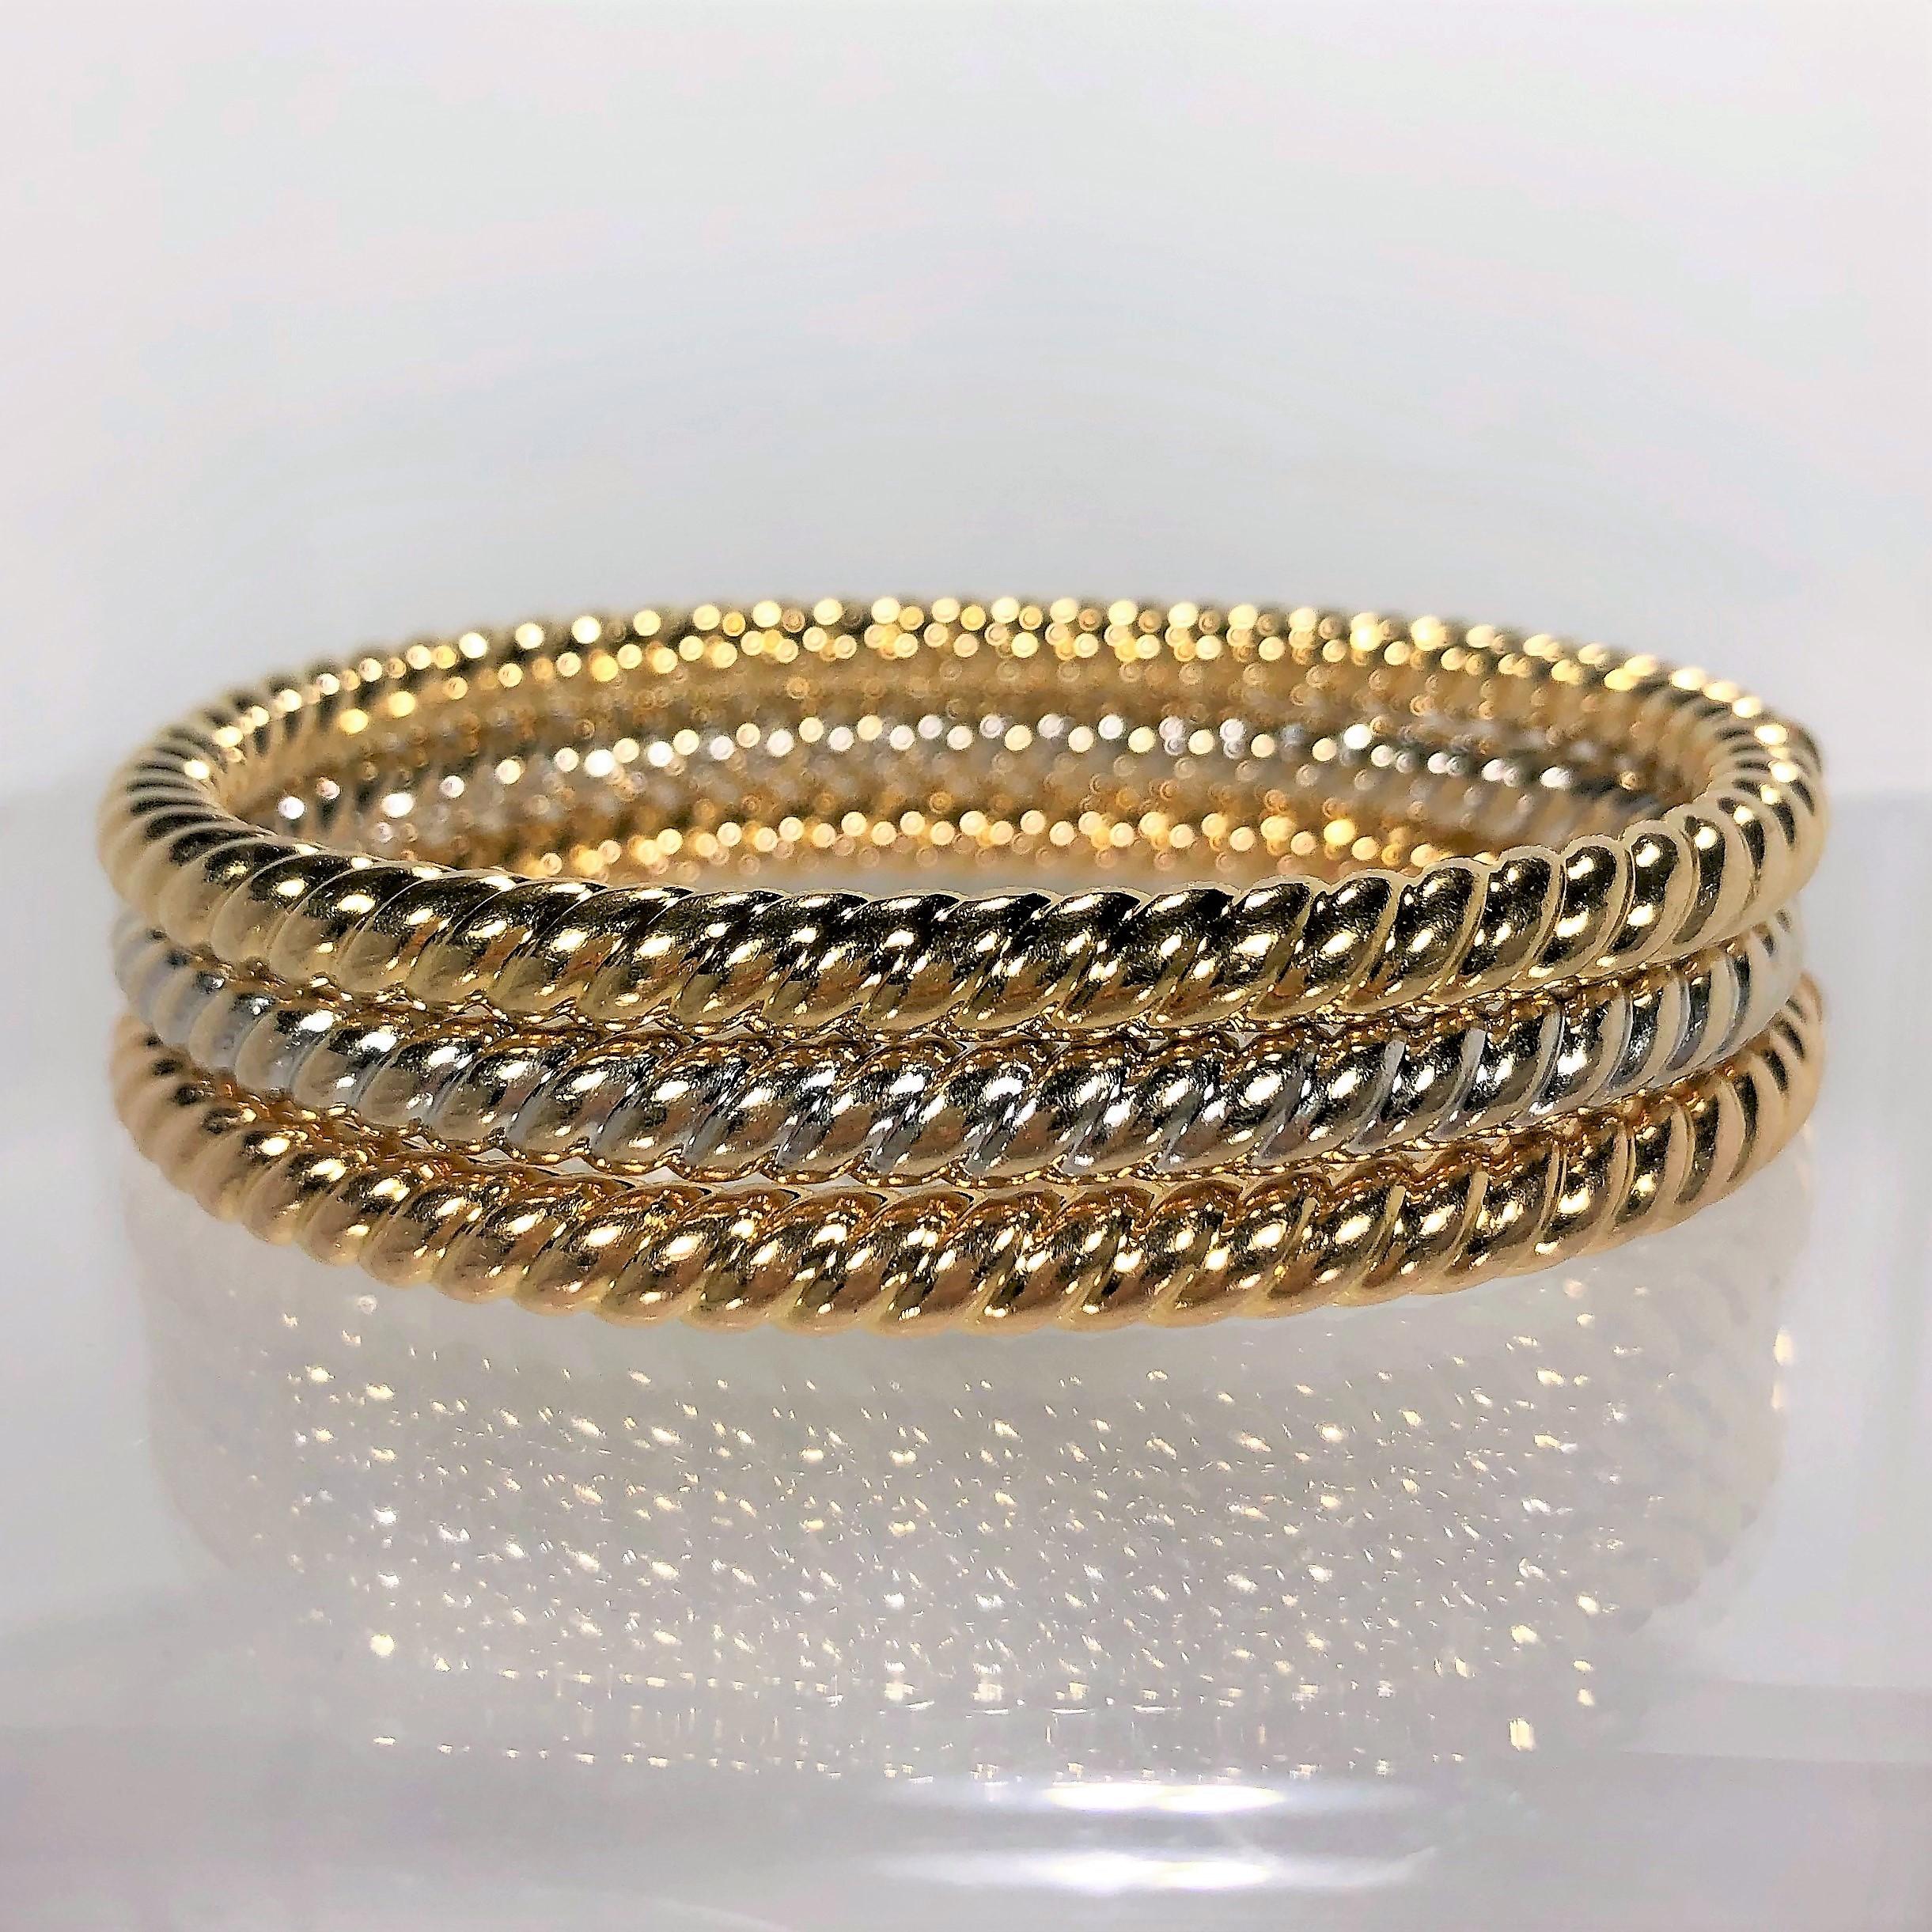 Set of three Italian, twisted rope, oval shaped bangles. One in 18K Yellow Gold, one in 18K White Gold and one
in 18K Rose Gold. When worn together the three are 9/16 inch wide total. Hinged on one side. 6 7/8 inch inside circumference. Fits a